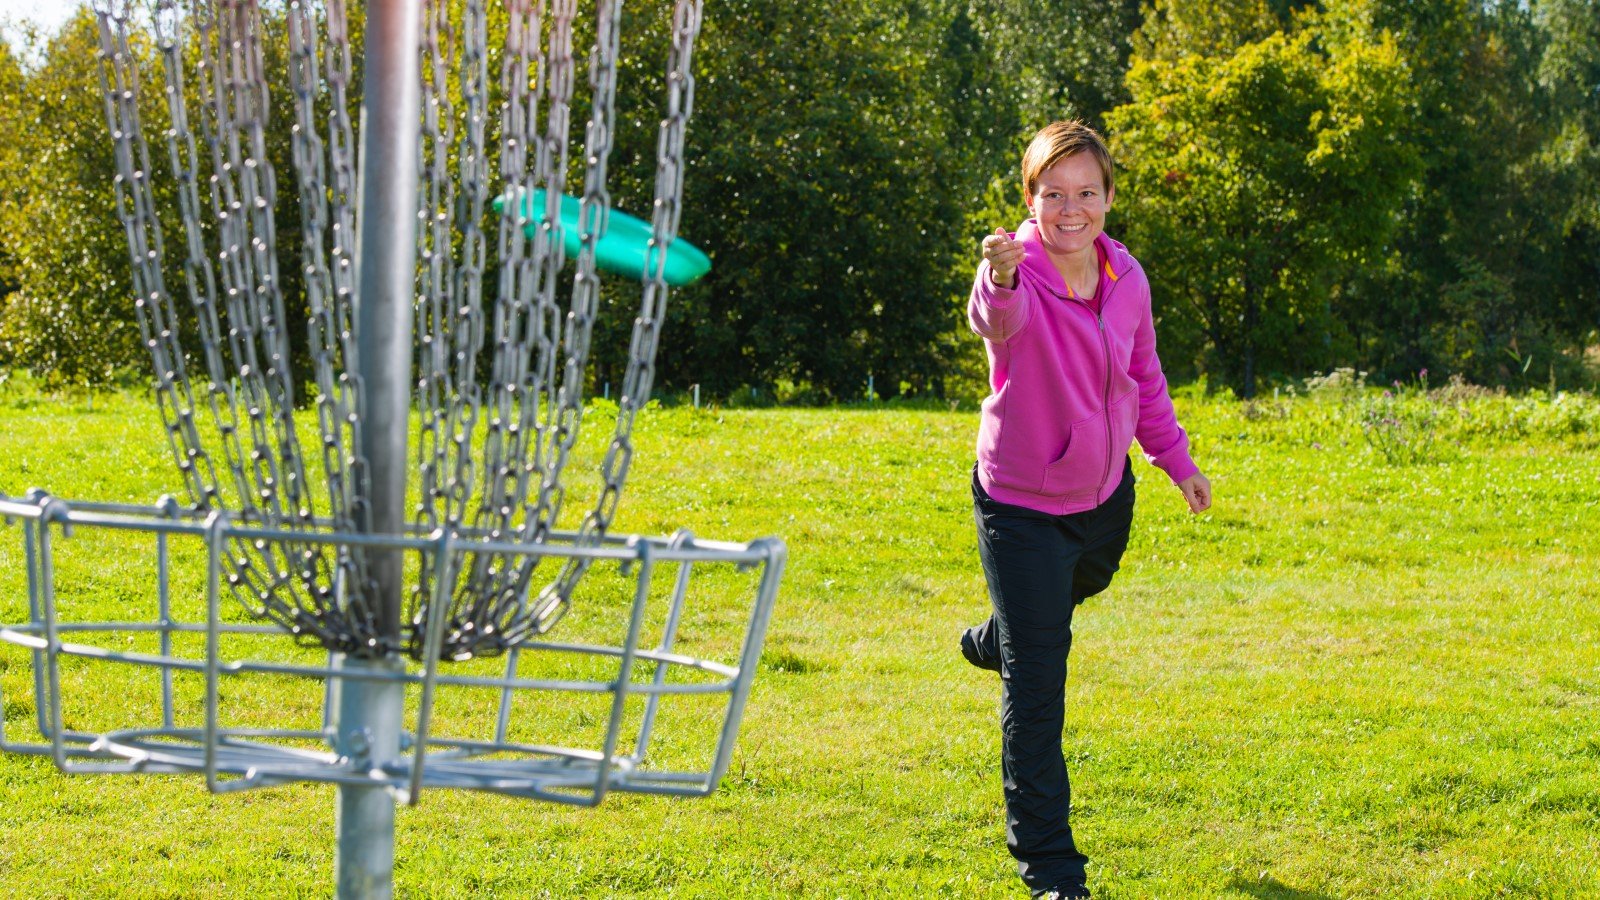 <p><span>A modern invention, disc golf, started in the 1960s. T</span><span>he sport involves throwing flying discs (the best-known brand is Frisbee) along preplanned routes toward special goals. While skill is involved, simply throwing the discs and laughing as you walk around the course can be a wonderful time. </span></p><p><span>The United States has just over 10,000 disc golf courses. </span><span>Discs come in an array of types, sizes, and purposes, but a basic disc runs as low as $5. </span><span>If you want to pick the best one, a little research goes a long way.   </span></p>